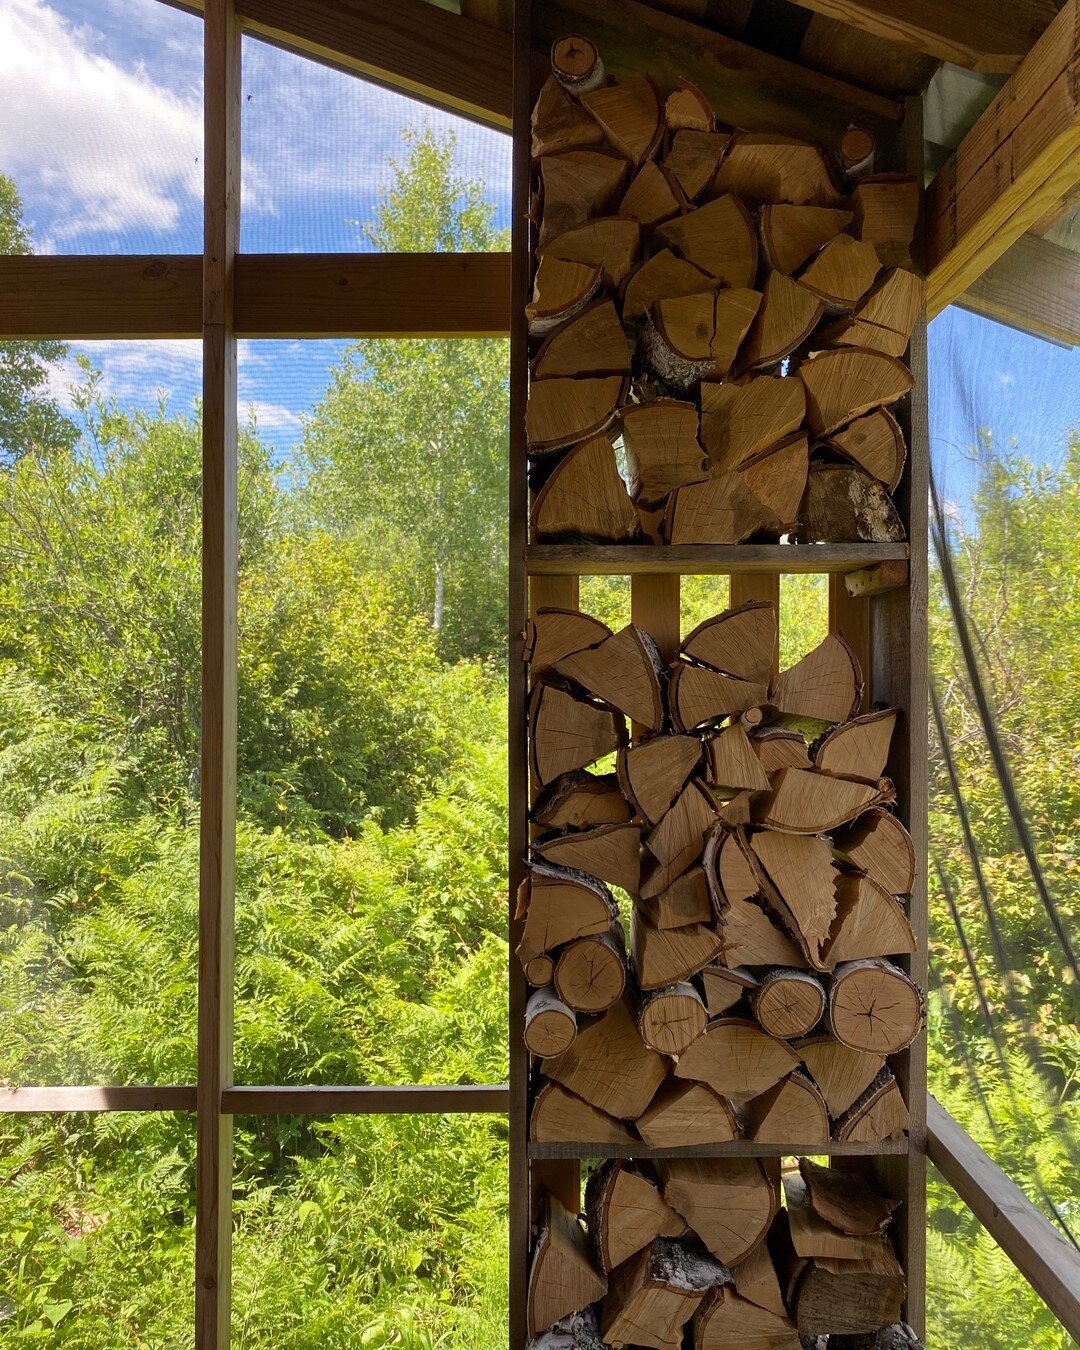 One of my favorite moments at Cabin Squared. I could hang in this little porch for hours. Safe and sound from bugs. ⠀⠀⠀⠀⠀⠀⠀⠀⠀
.⠀⠀⠀⠀⠀⠀⠀⠀⠀
.⠀⠀⠀⠀⠀⠀⠀⠀⠀
.⠀⠀⠀⠀⠀⠀⠀⠀⠀
 #erearchitecture #architecture #design #architecture_lovers #architecturelovers #ere_cabin